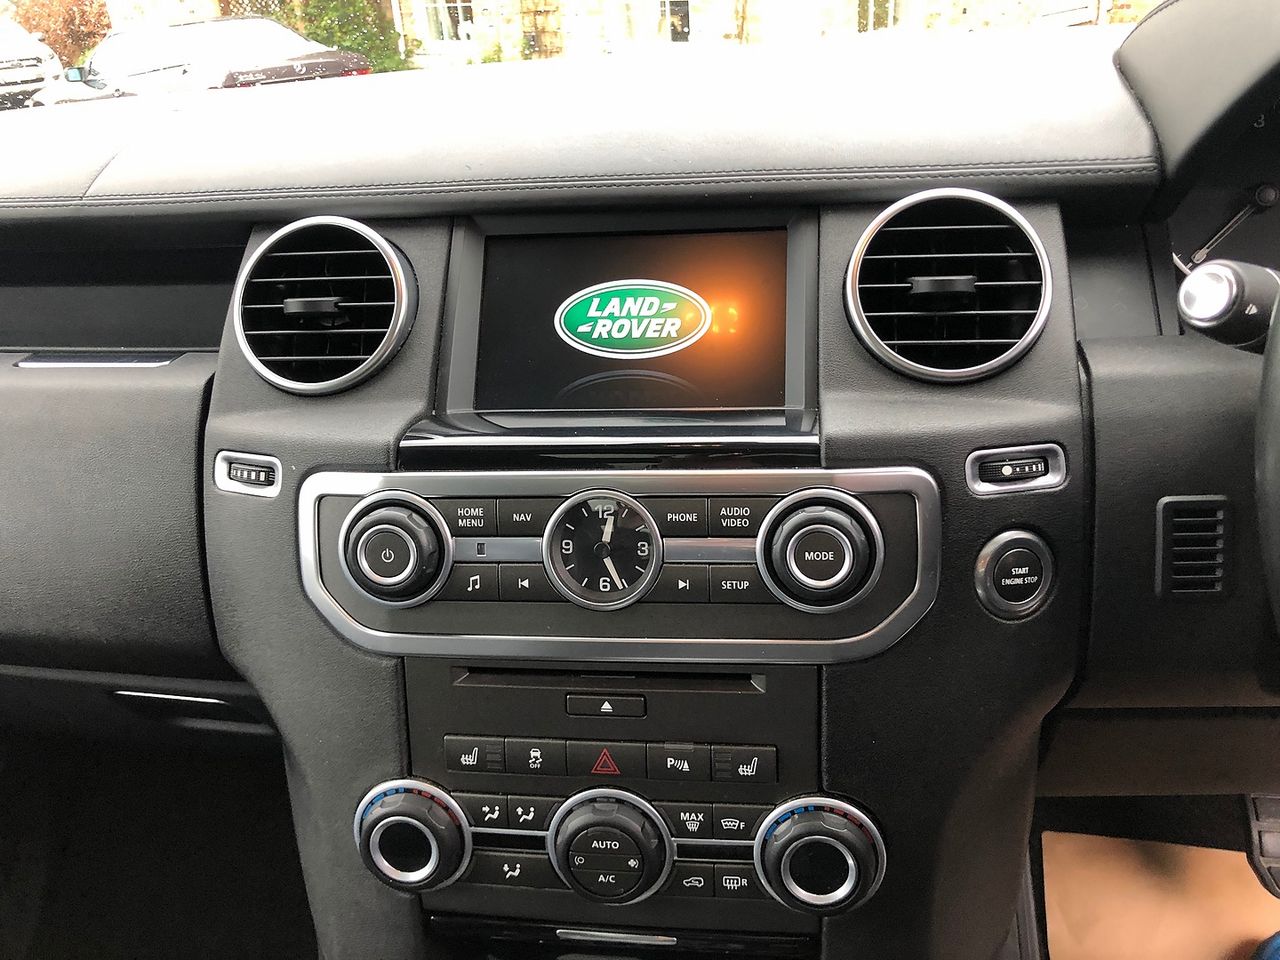 2016 LAND ROVER Discovery 3.0 SDV6 Landmark - Picture 10 of 14